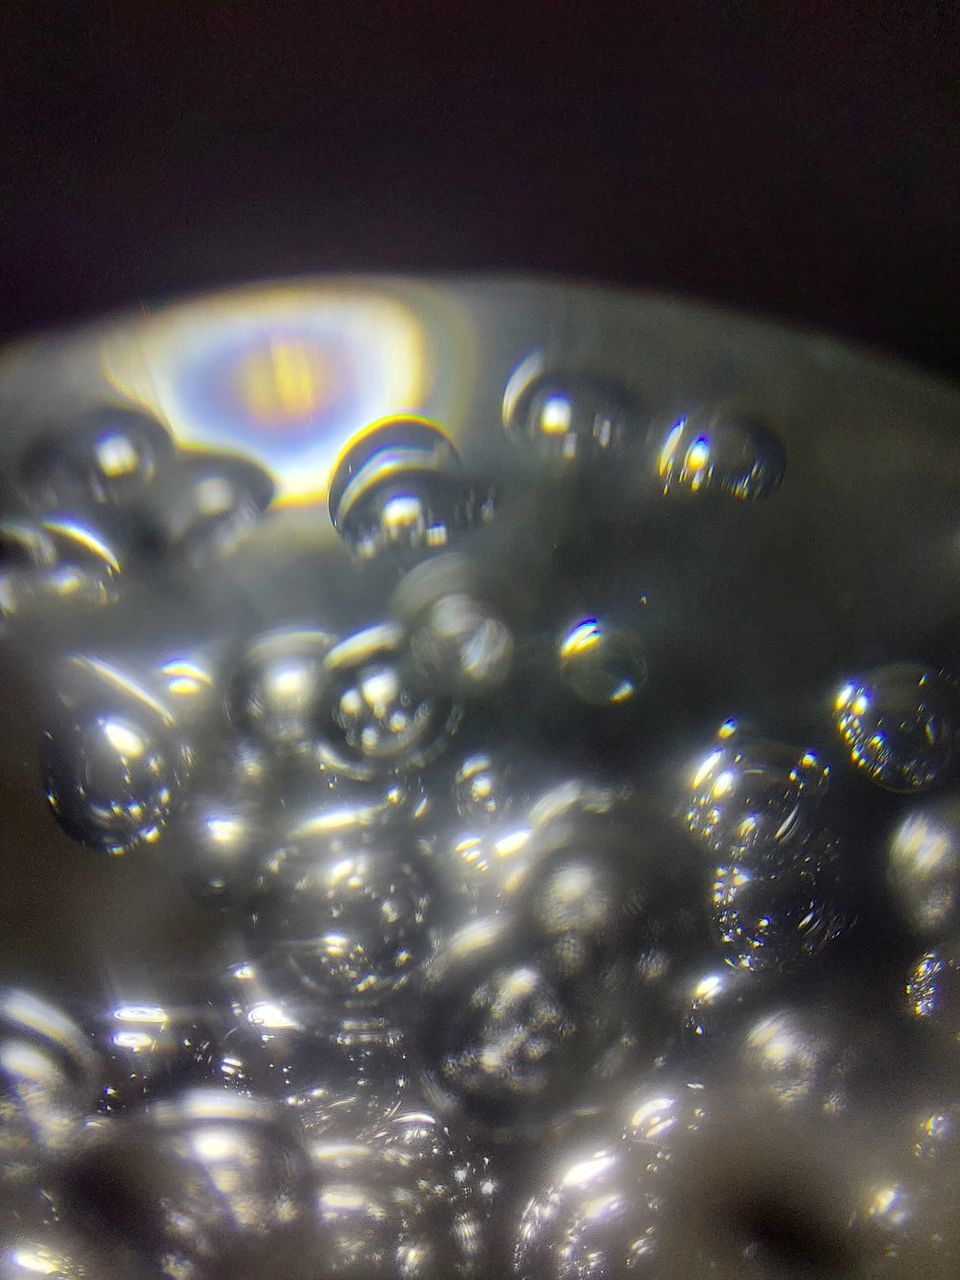 FULL FRAME SHOT OF WATER DROPS ON ILLUMINATED SURFACE